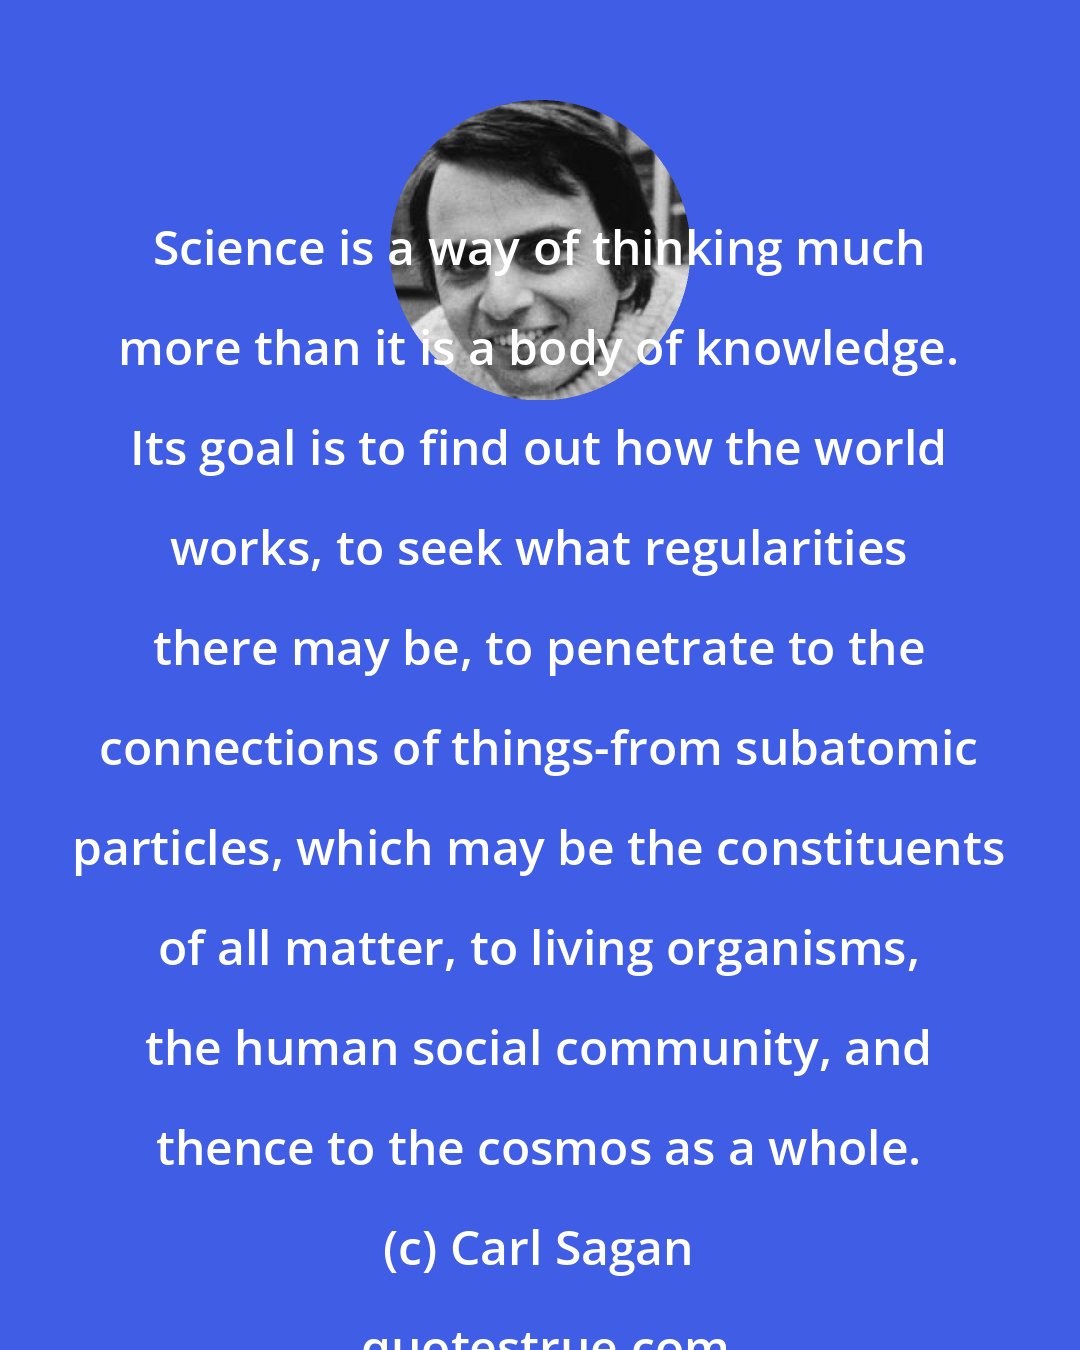 Carl Sagan: Science is a way of thinking much more than it is a body of knowledge. Its goal is to find out how the world works, to seek what regularities there may be, to penetrate to the connections of things-from subatomic particles, which may be the constituents of all matter, to living organisms, the human social community, and thence to the cosmos as a whole.